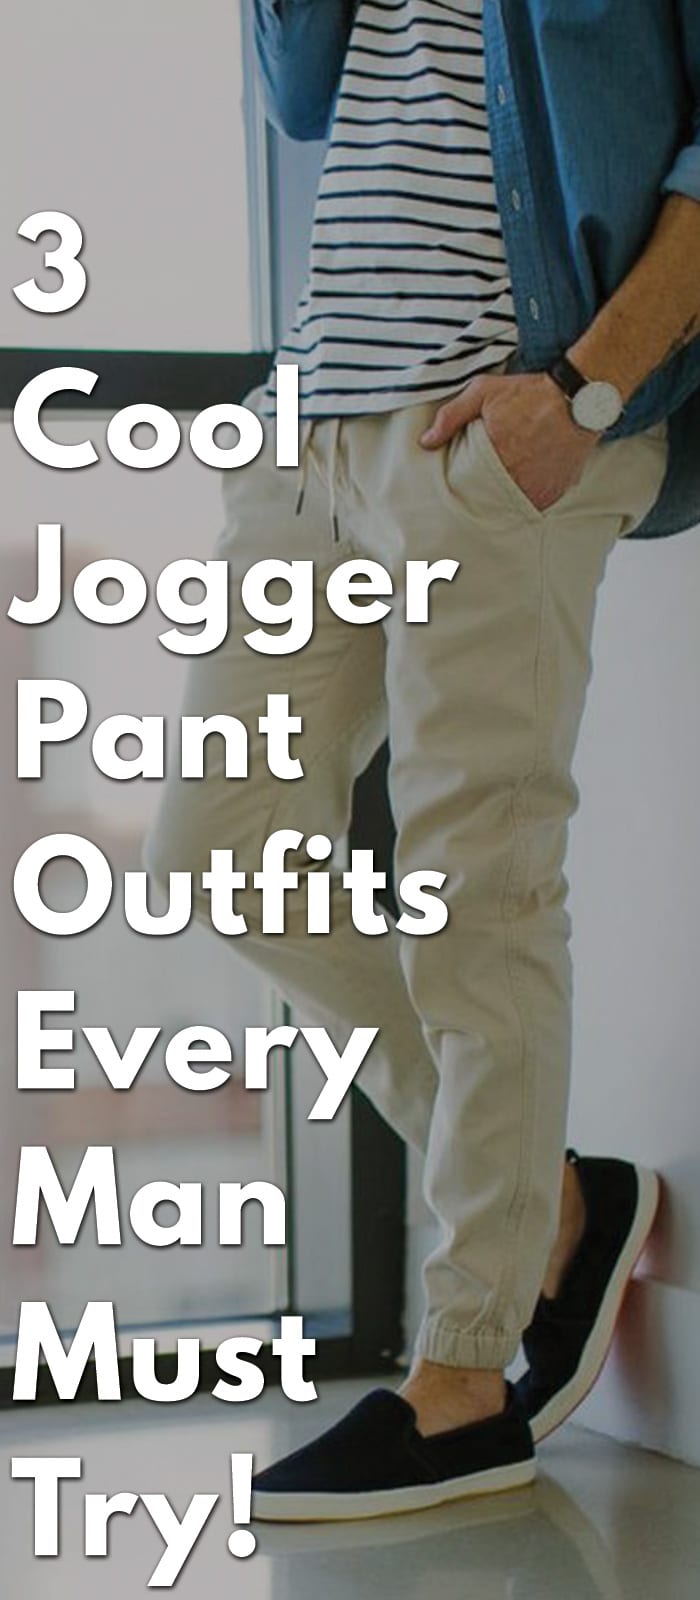 3-Cool-Jogger-Pant-Outfits-Every-Man-Must-Try!